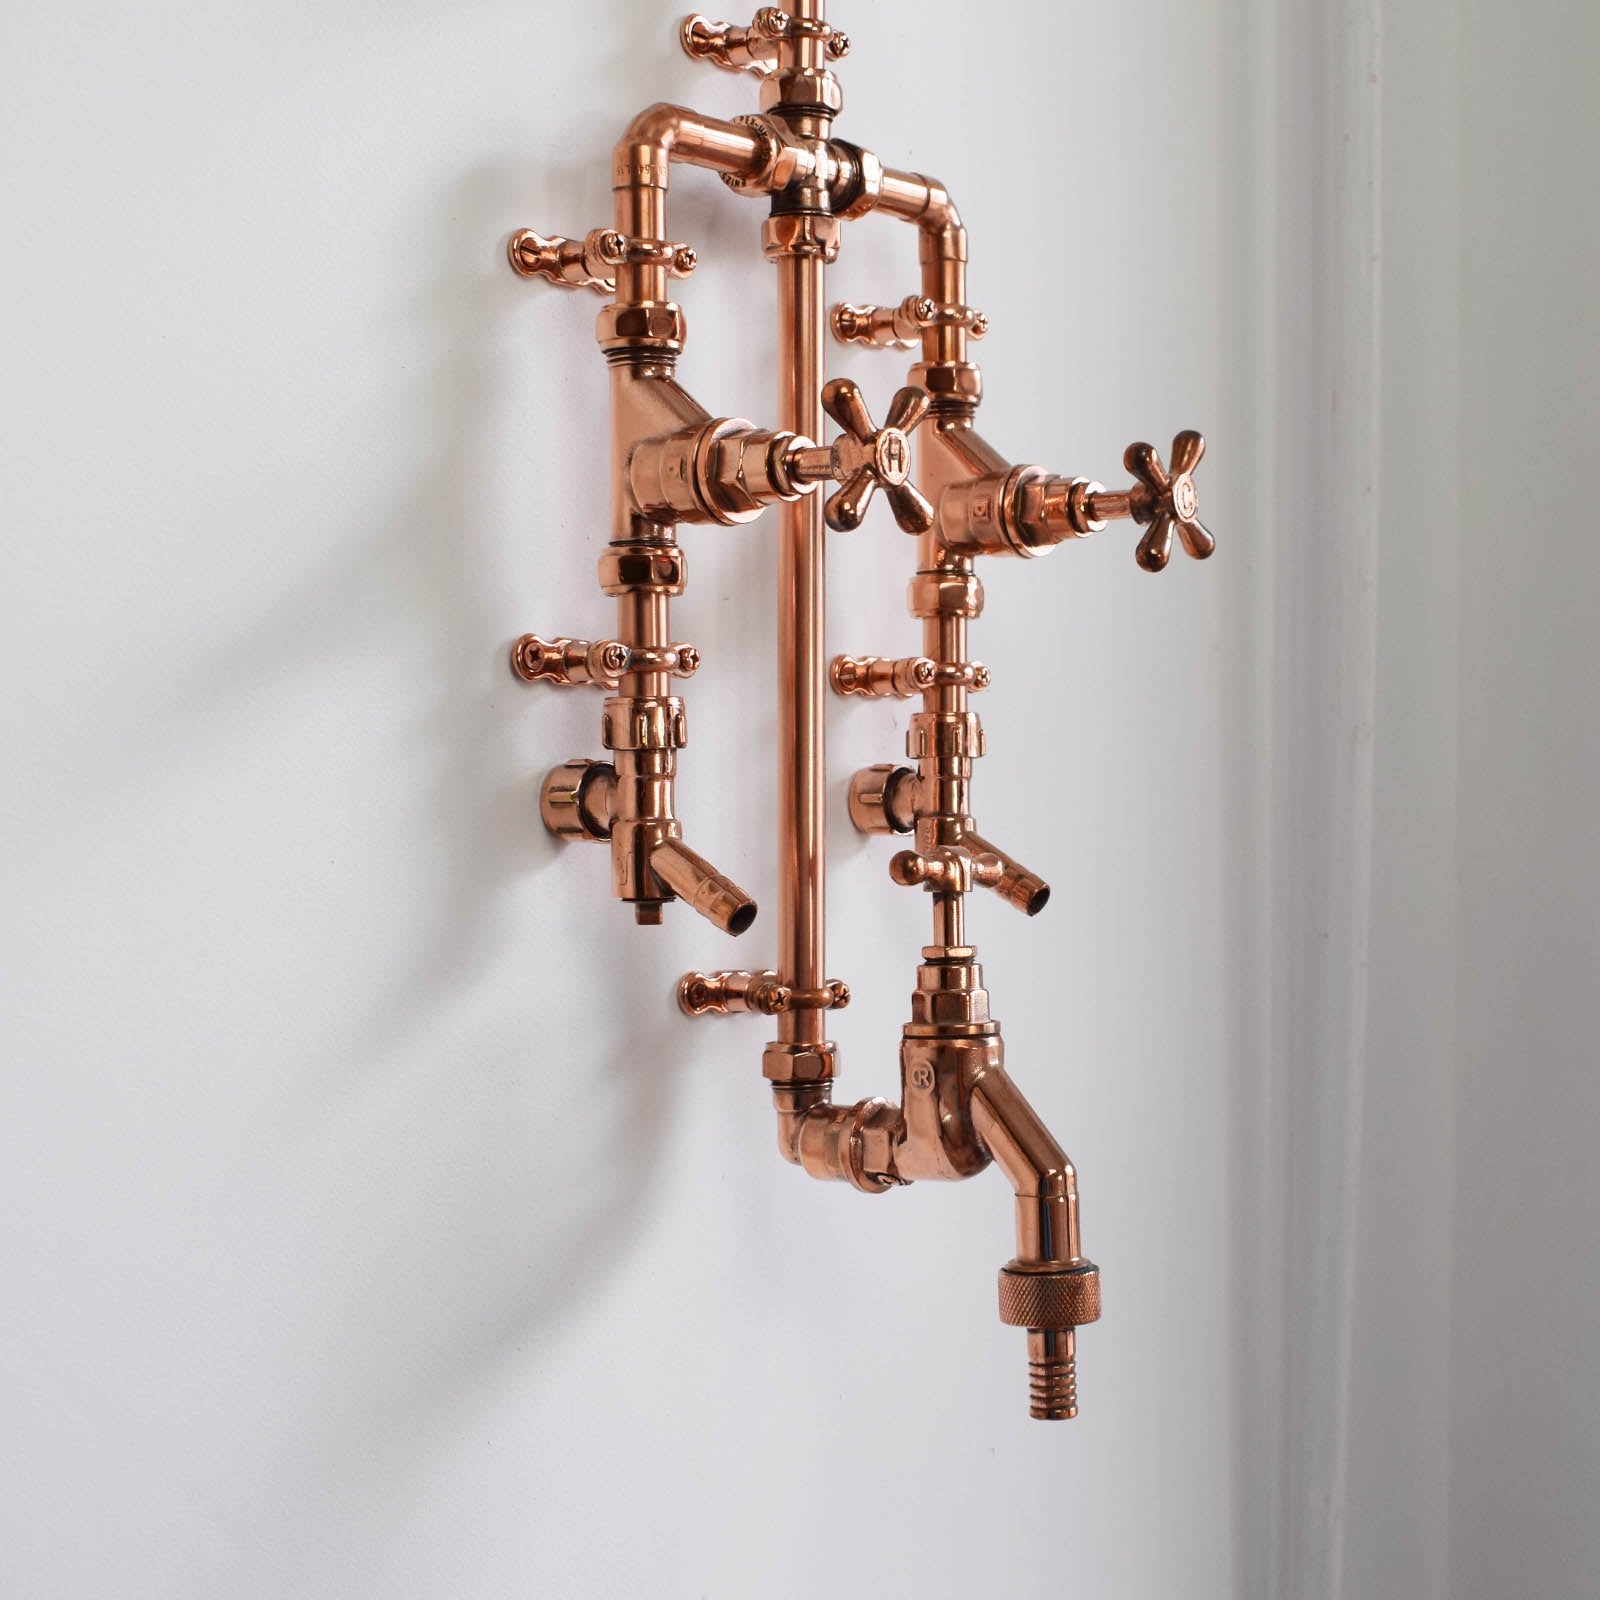 stunning outside shower design manufactured from genuine copper